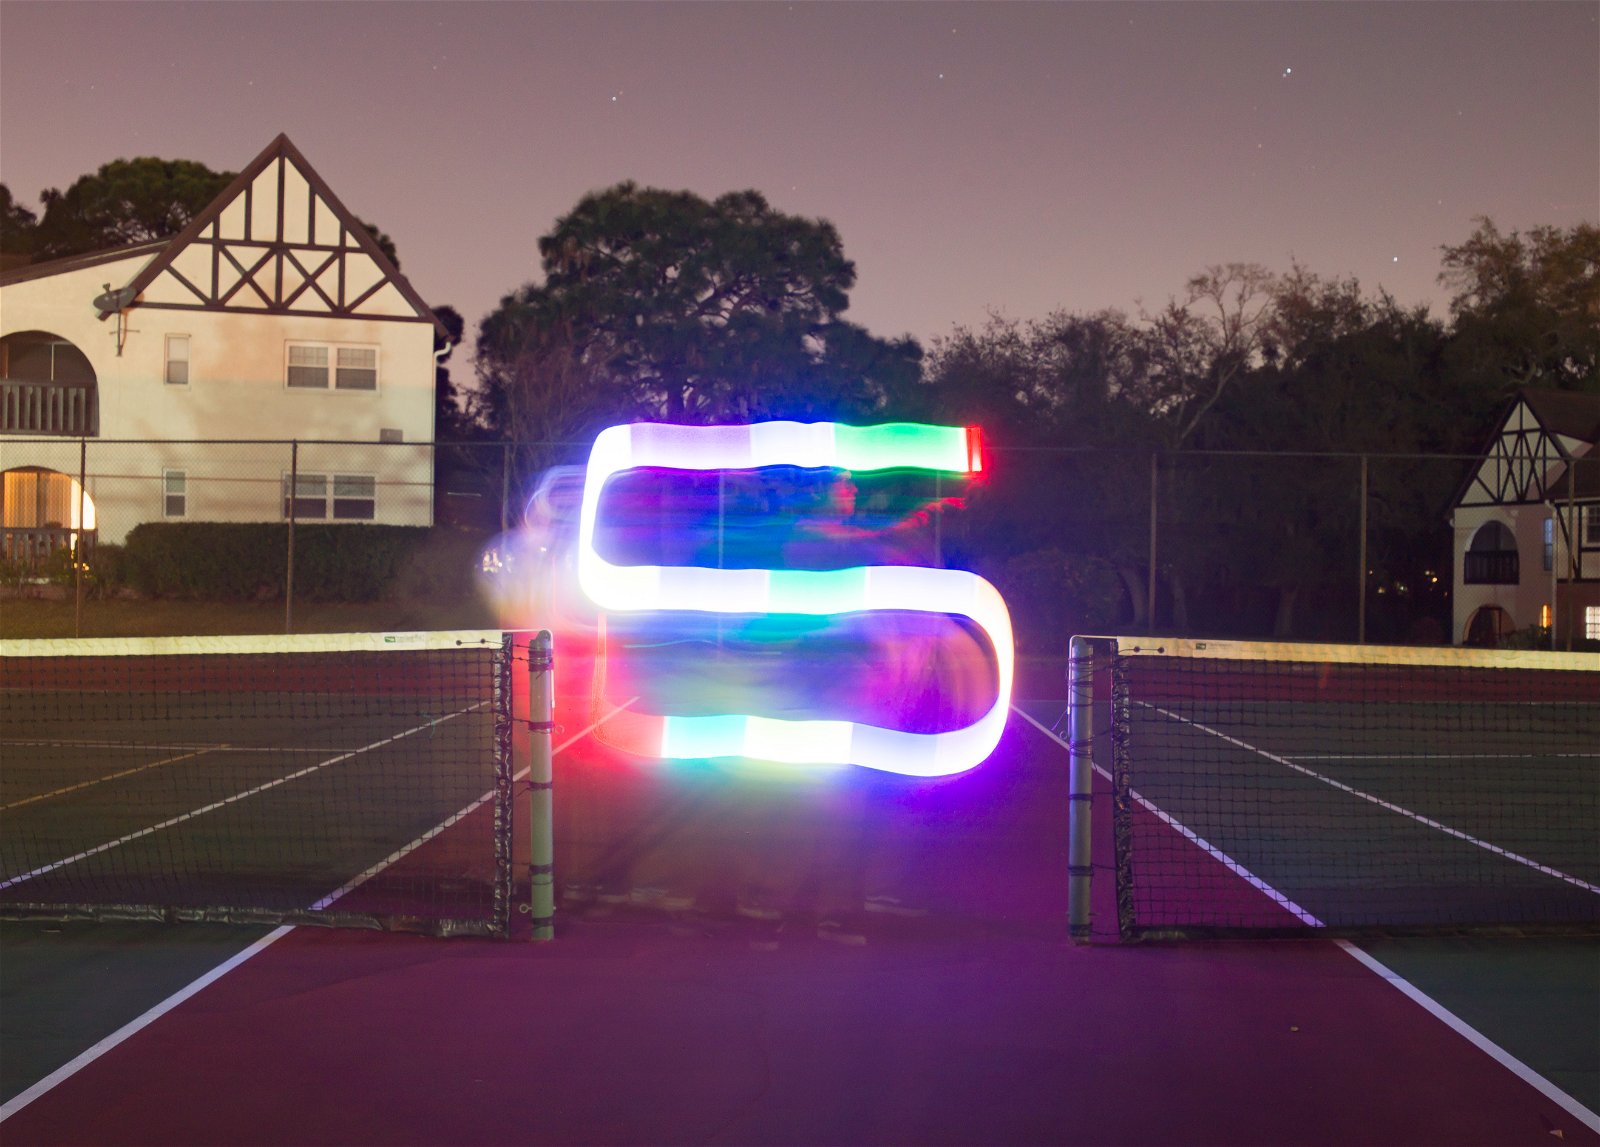 A light painting of the letter S between two tennis courts as night for creative lighting ideas